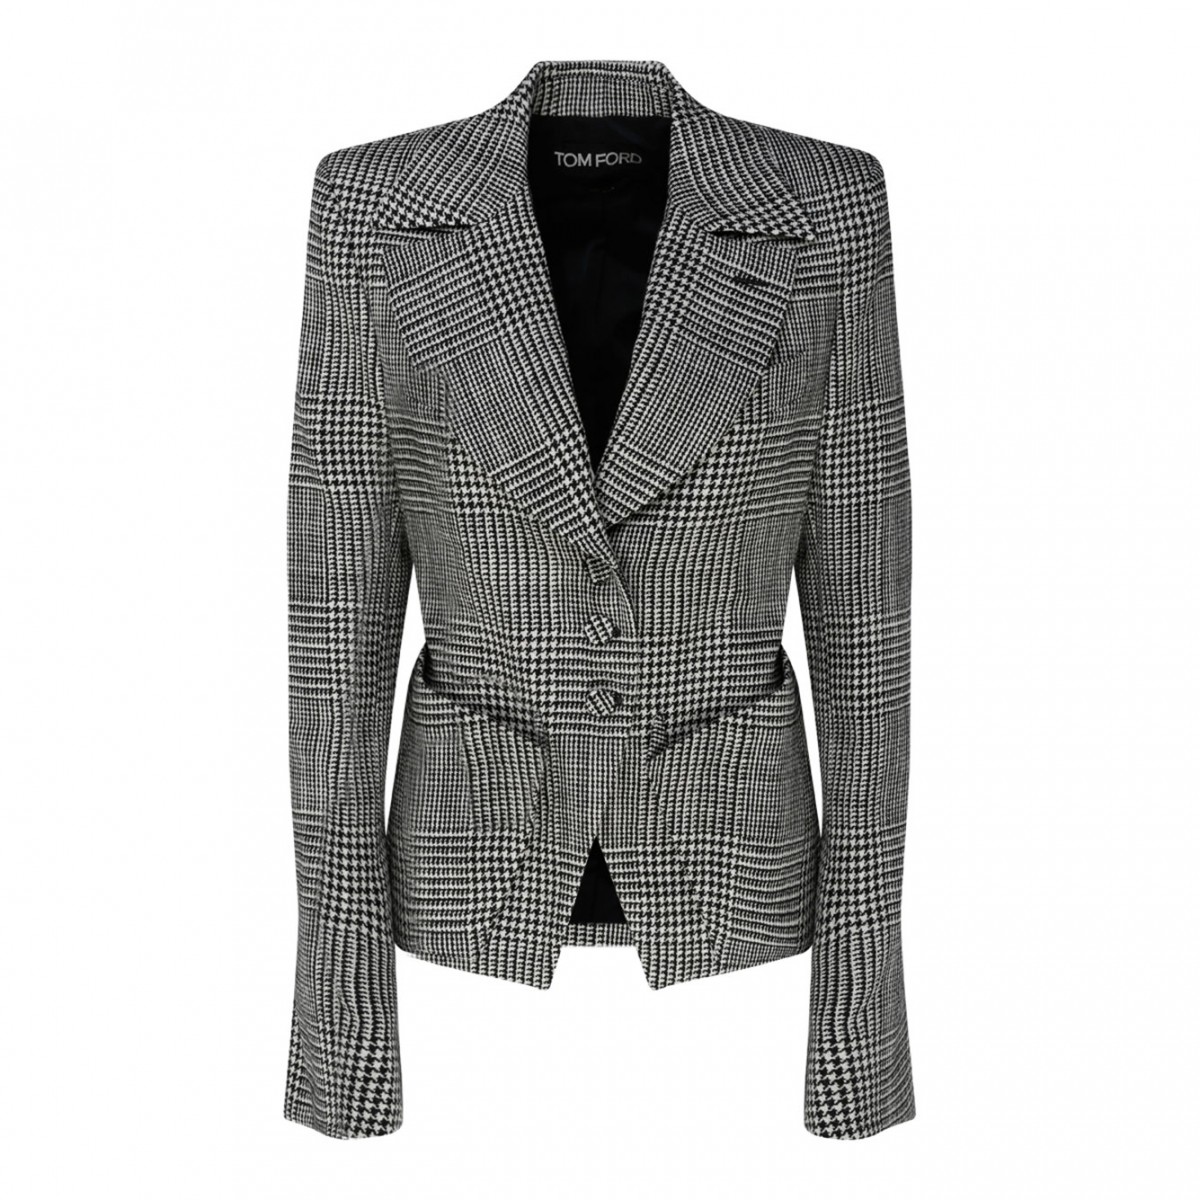 Tom Ford Black and Chalk Wool Houndstooth Pattern Single Breasted Blazer